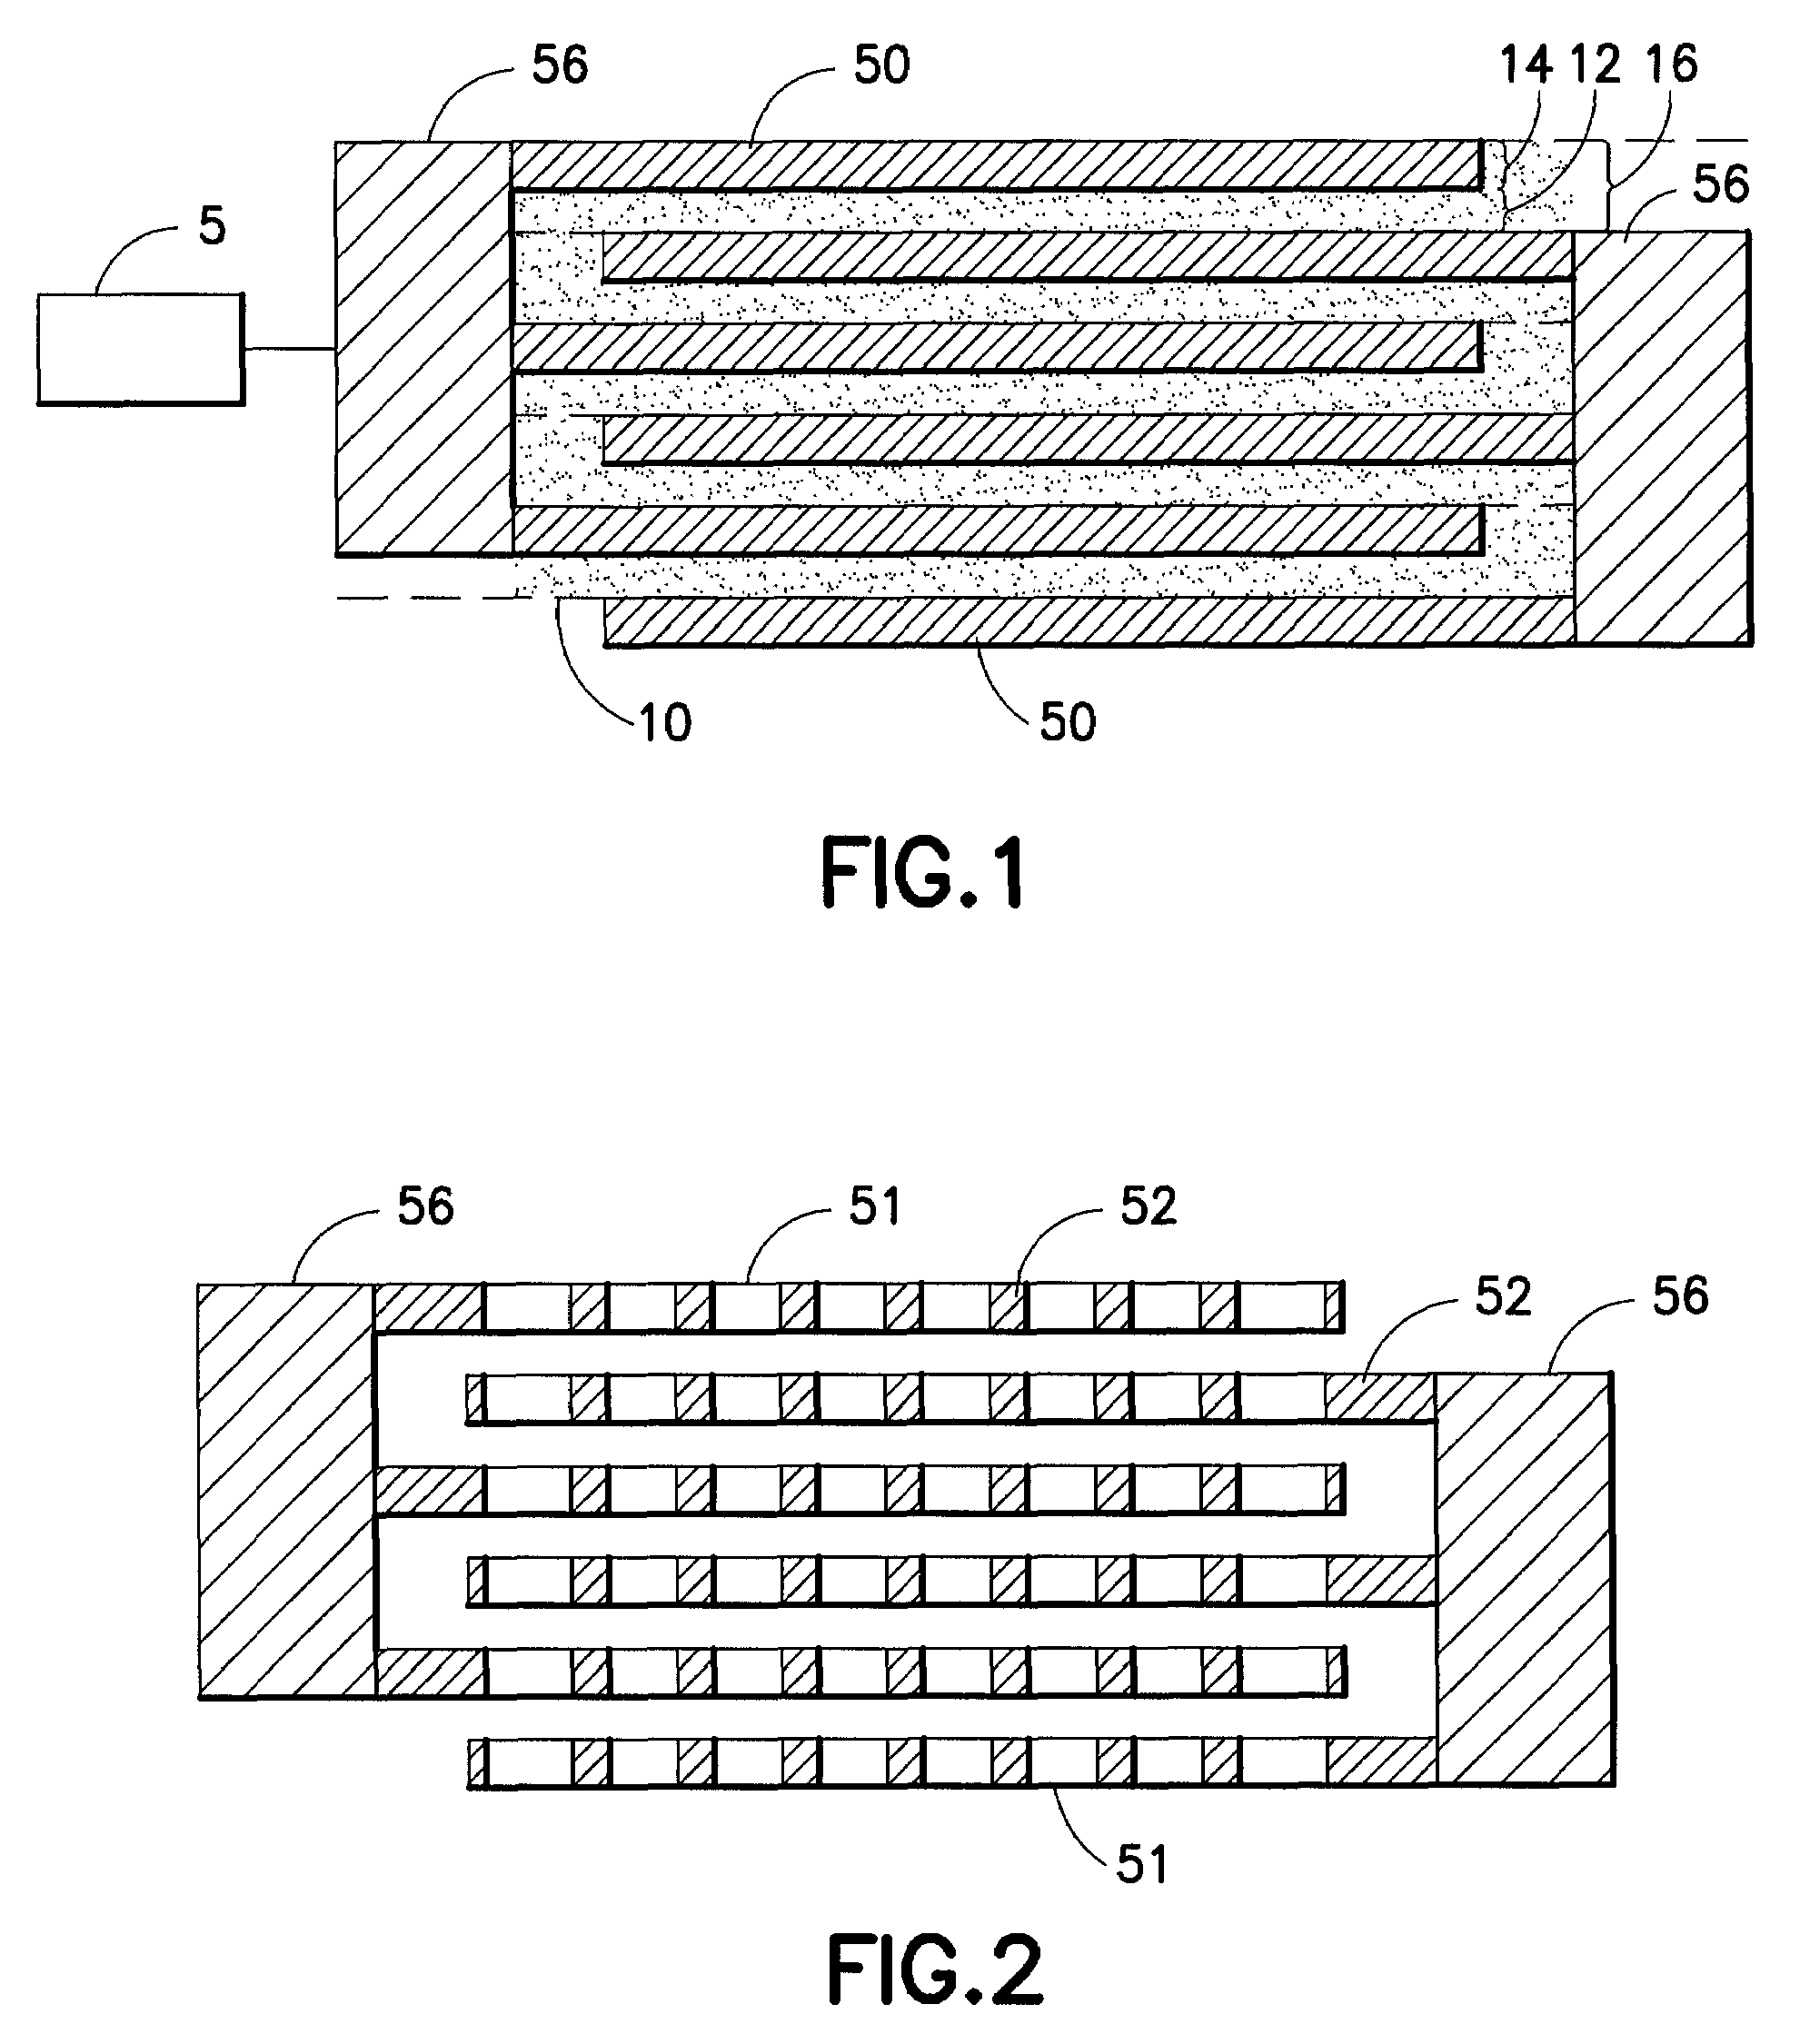 Integrated parallel plate capacitors